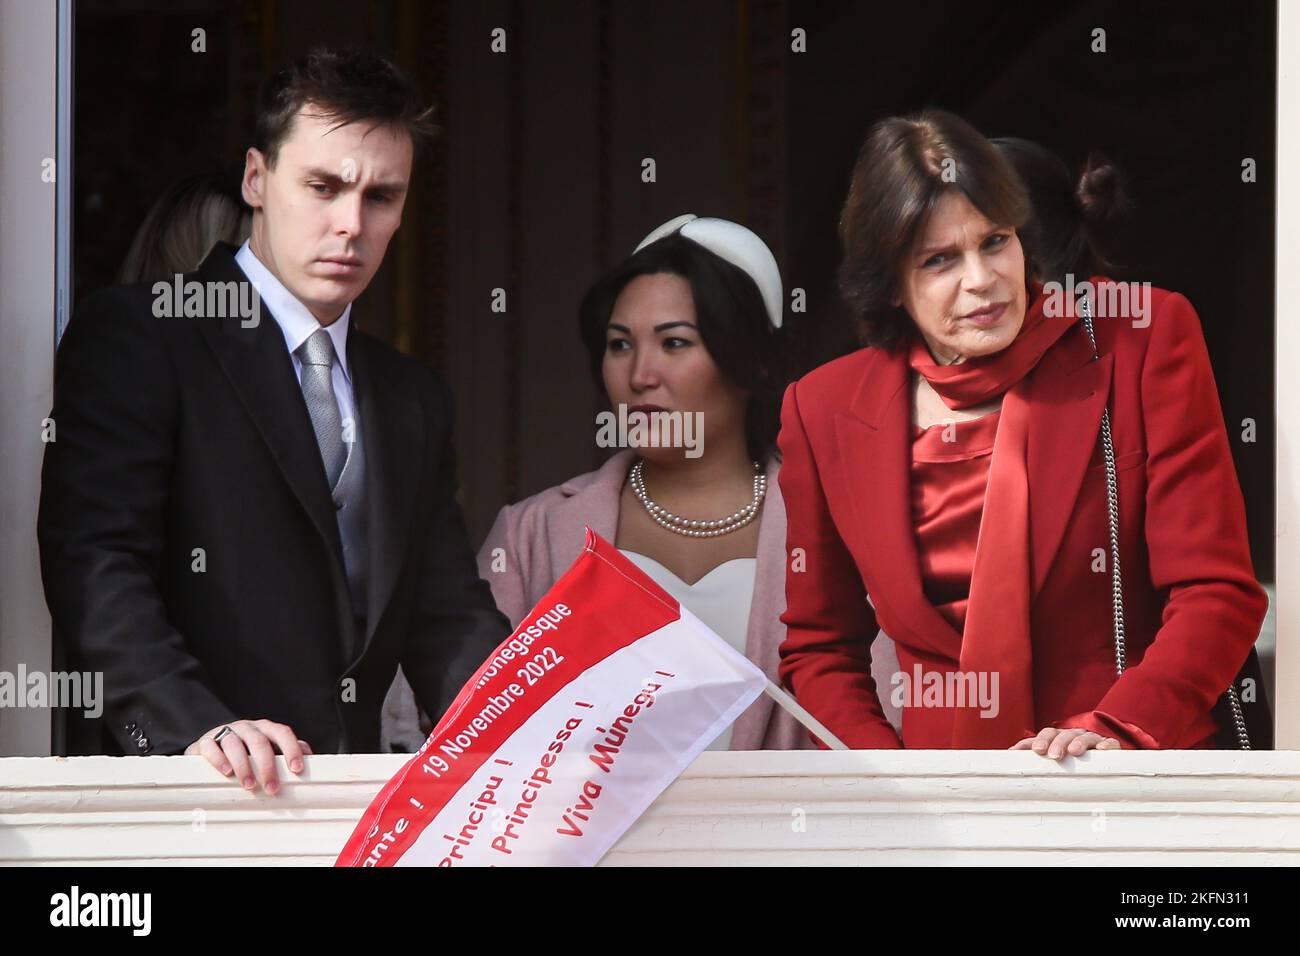 Louis Ducruet, Camille Gottlieb, Pauline Ducruet, Marie Chevalier, Princess Stephanie of Monaco are attending the parade at the palace balcony during the celebration for the National Day on November 19, 2022 in Monaco Ville, Principality of Monaco. Photo by Marco Piovanotto/IPA - NO TABLOIDS Stock Photo